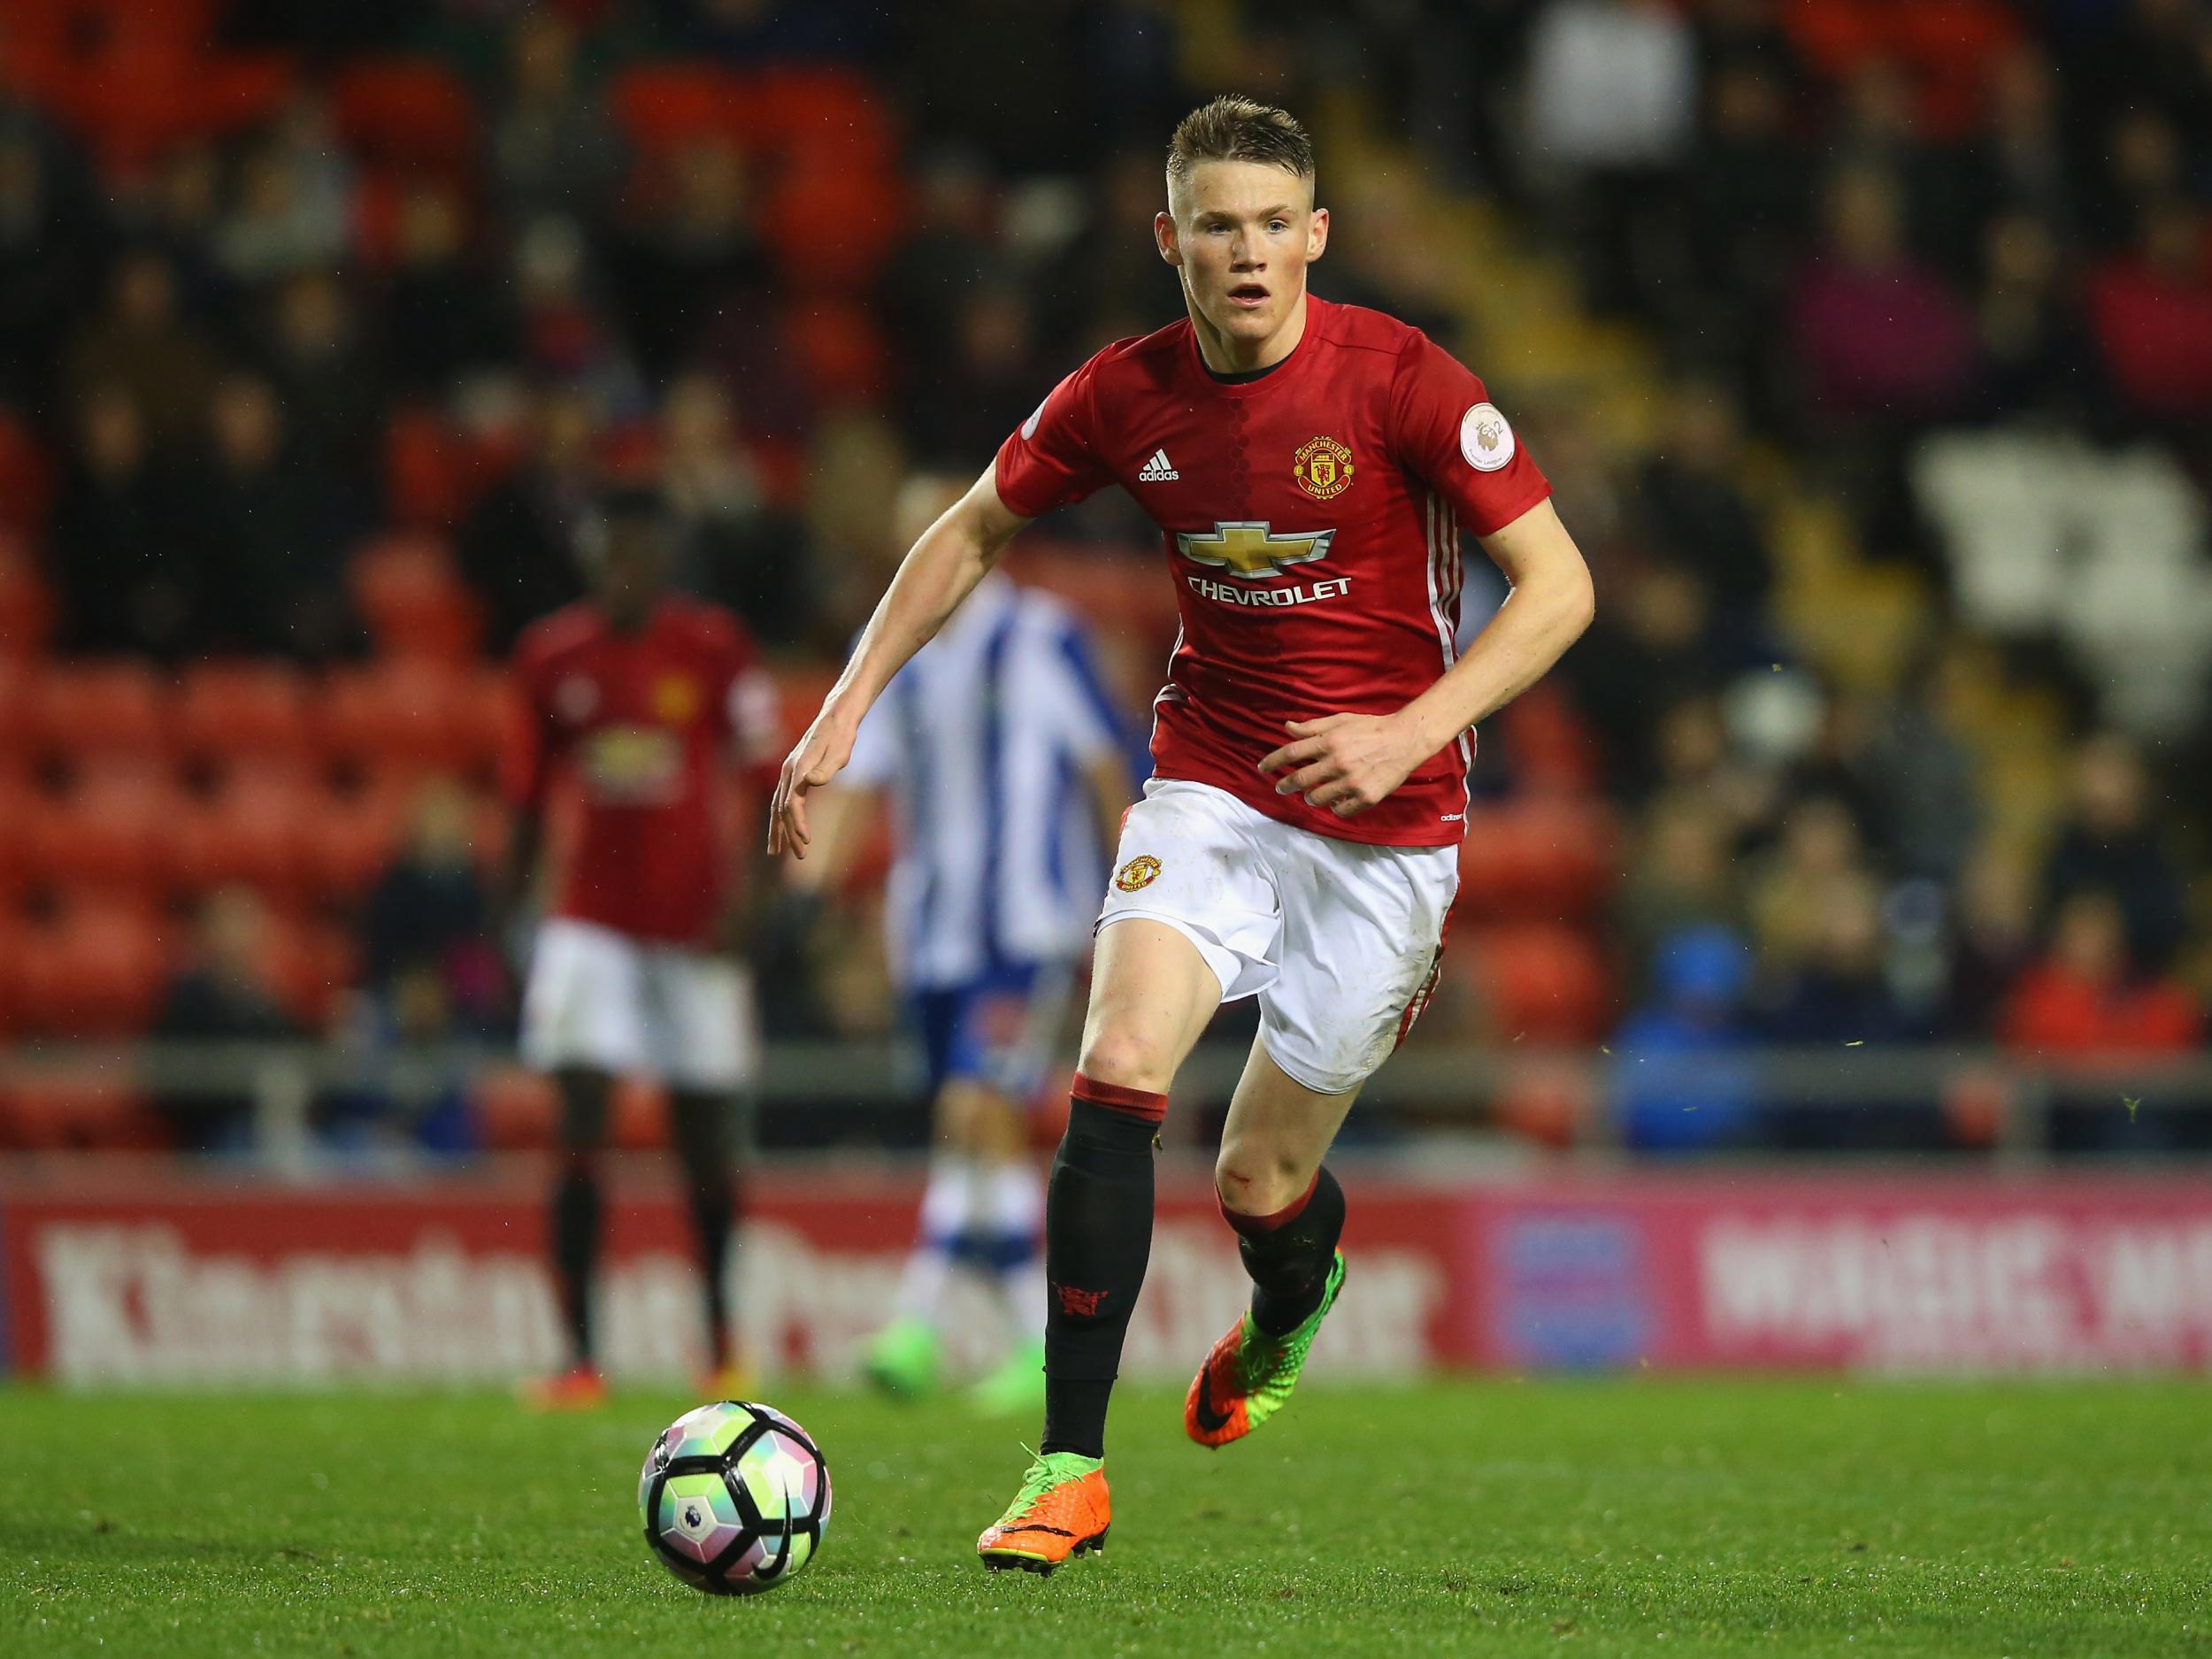 McTominay will be handed his chance against Crystal Palace